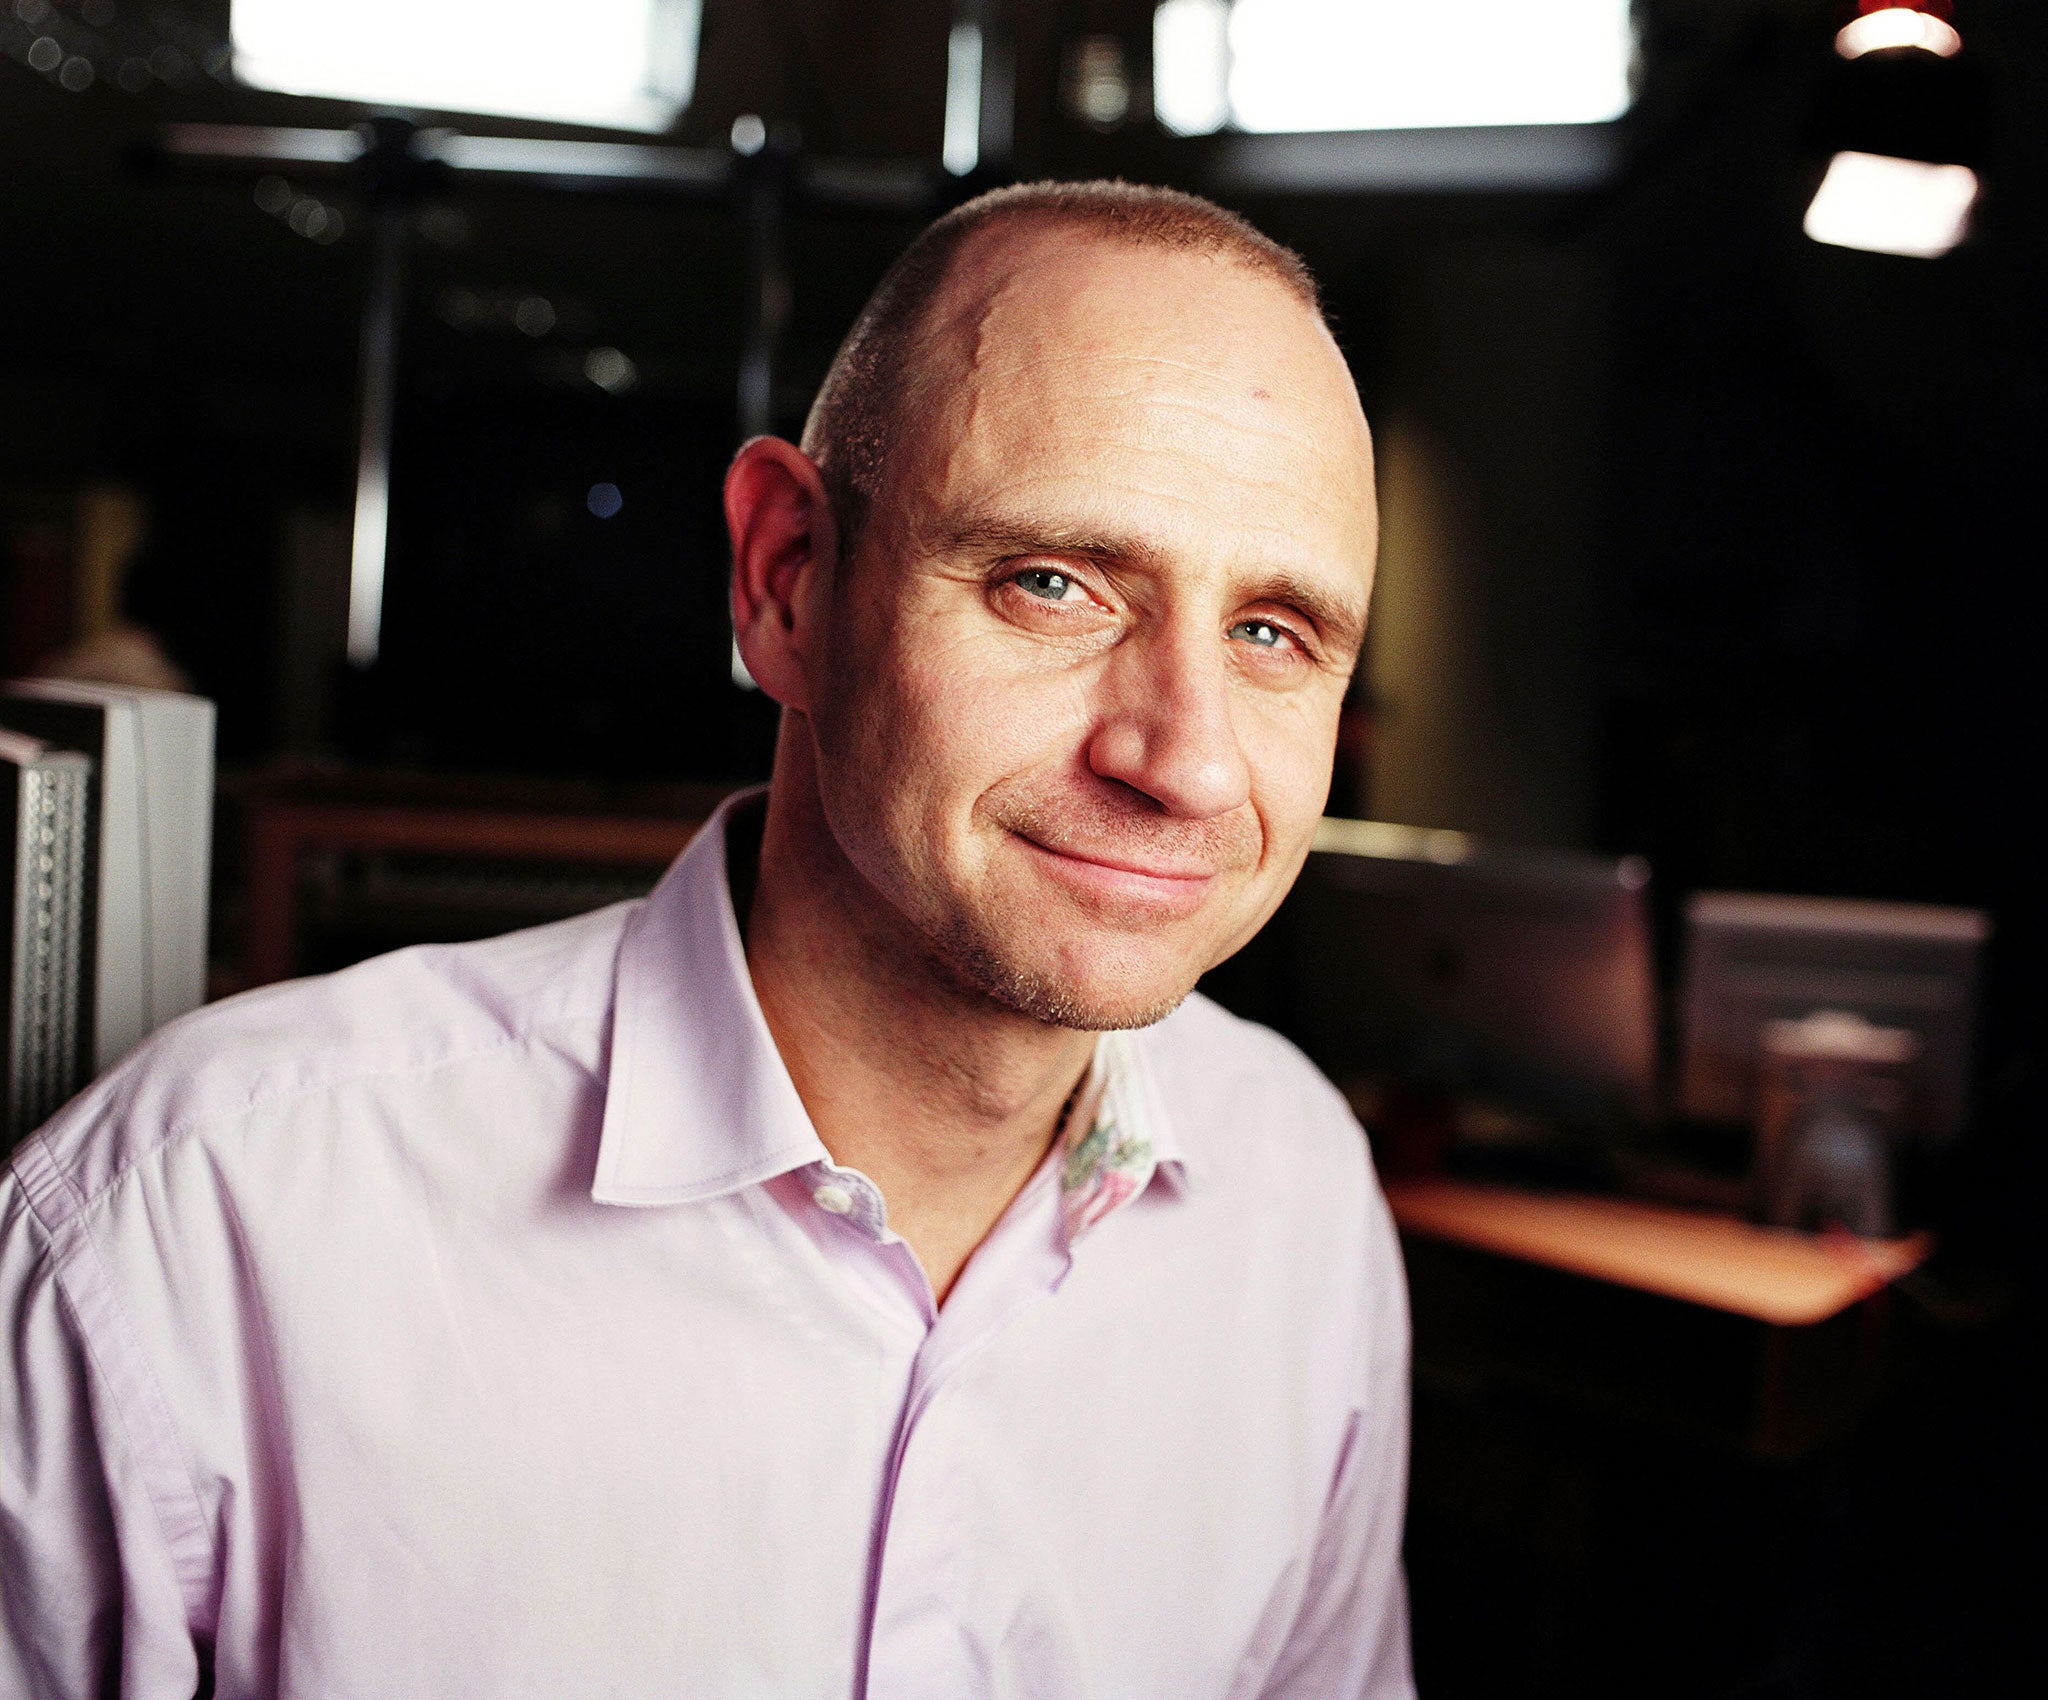 Evan Davis will replace Jeremy Paxman as the lead presenter on Newsnight